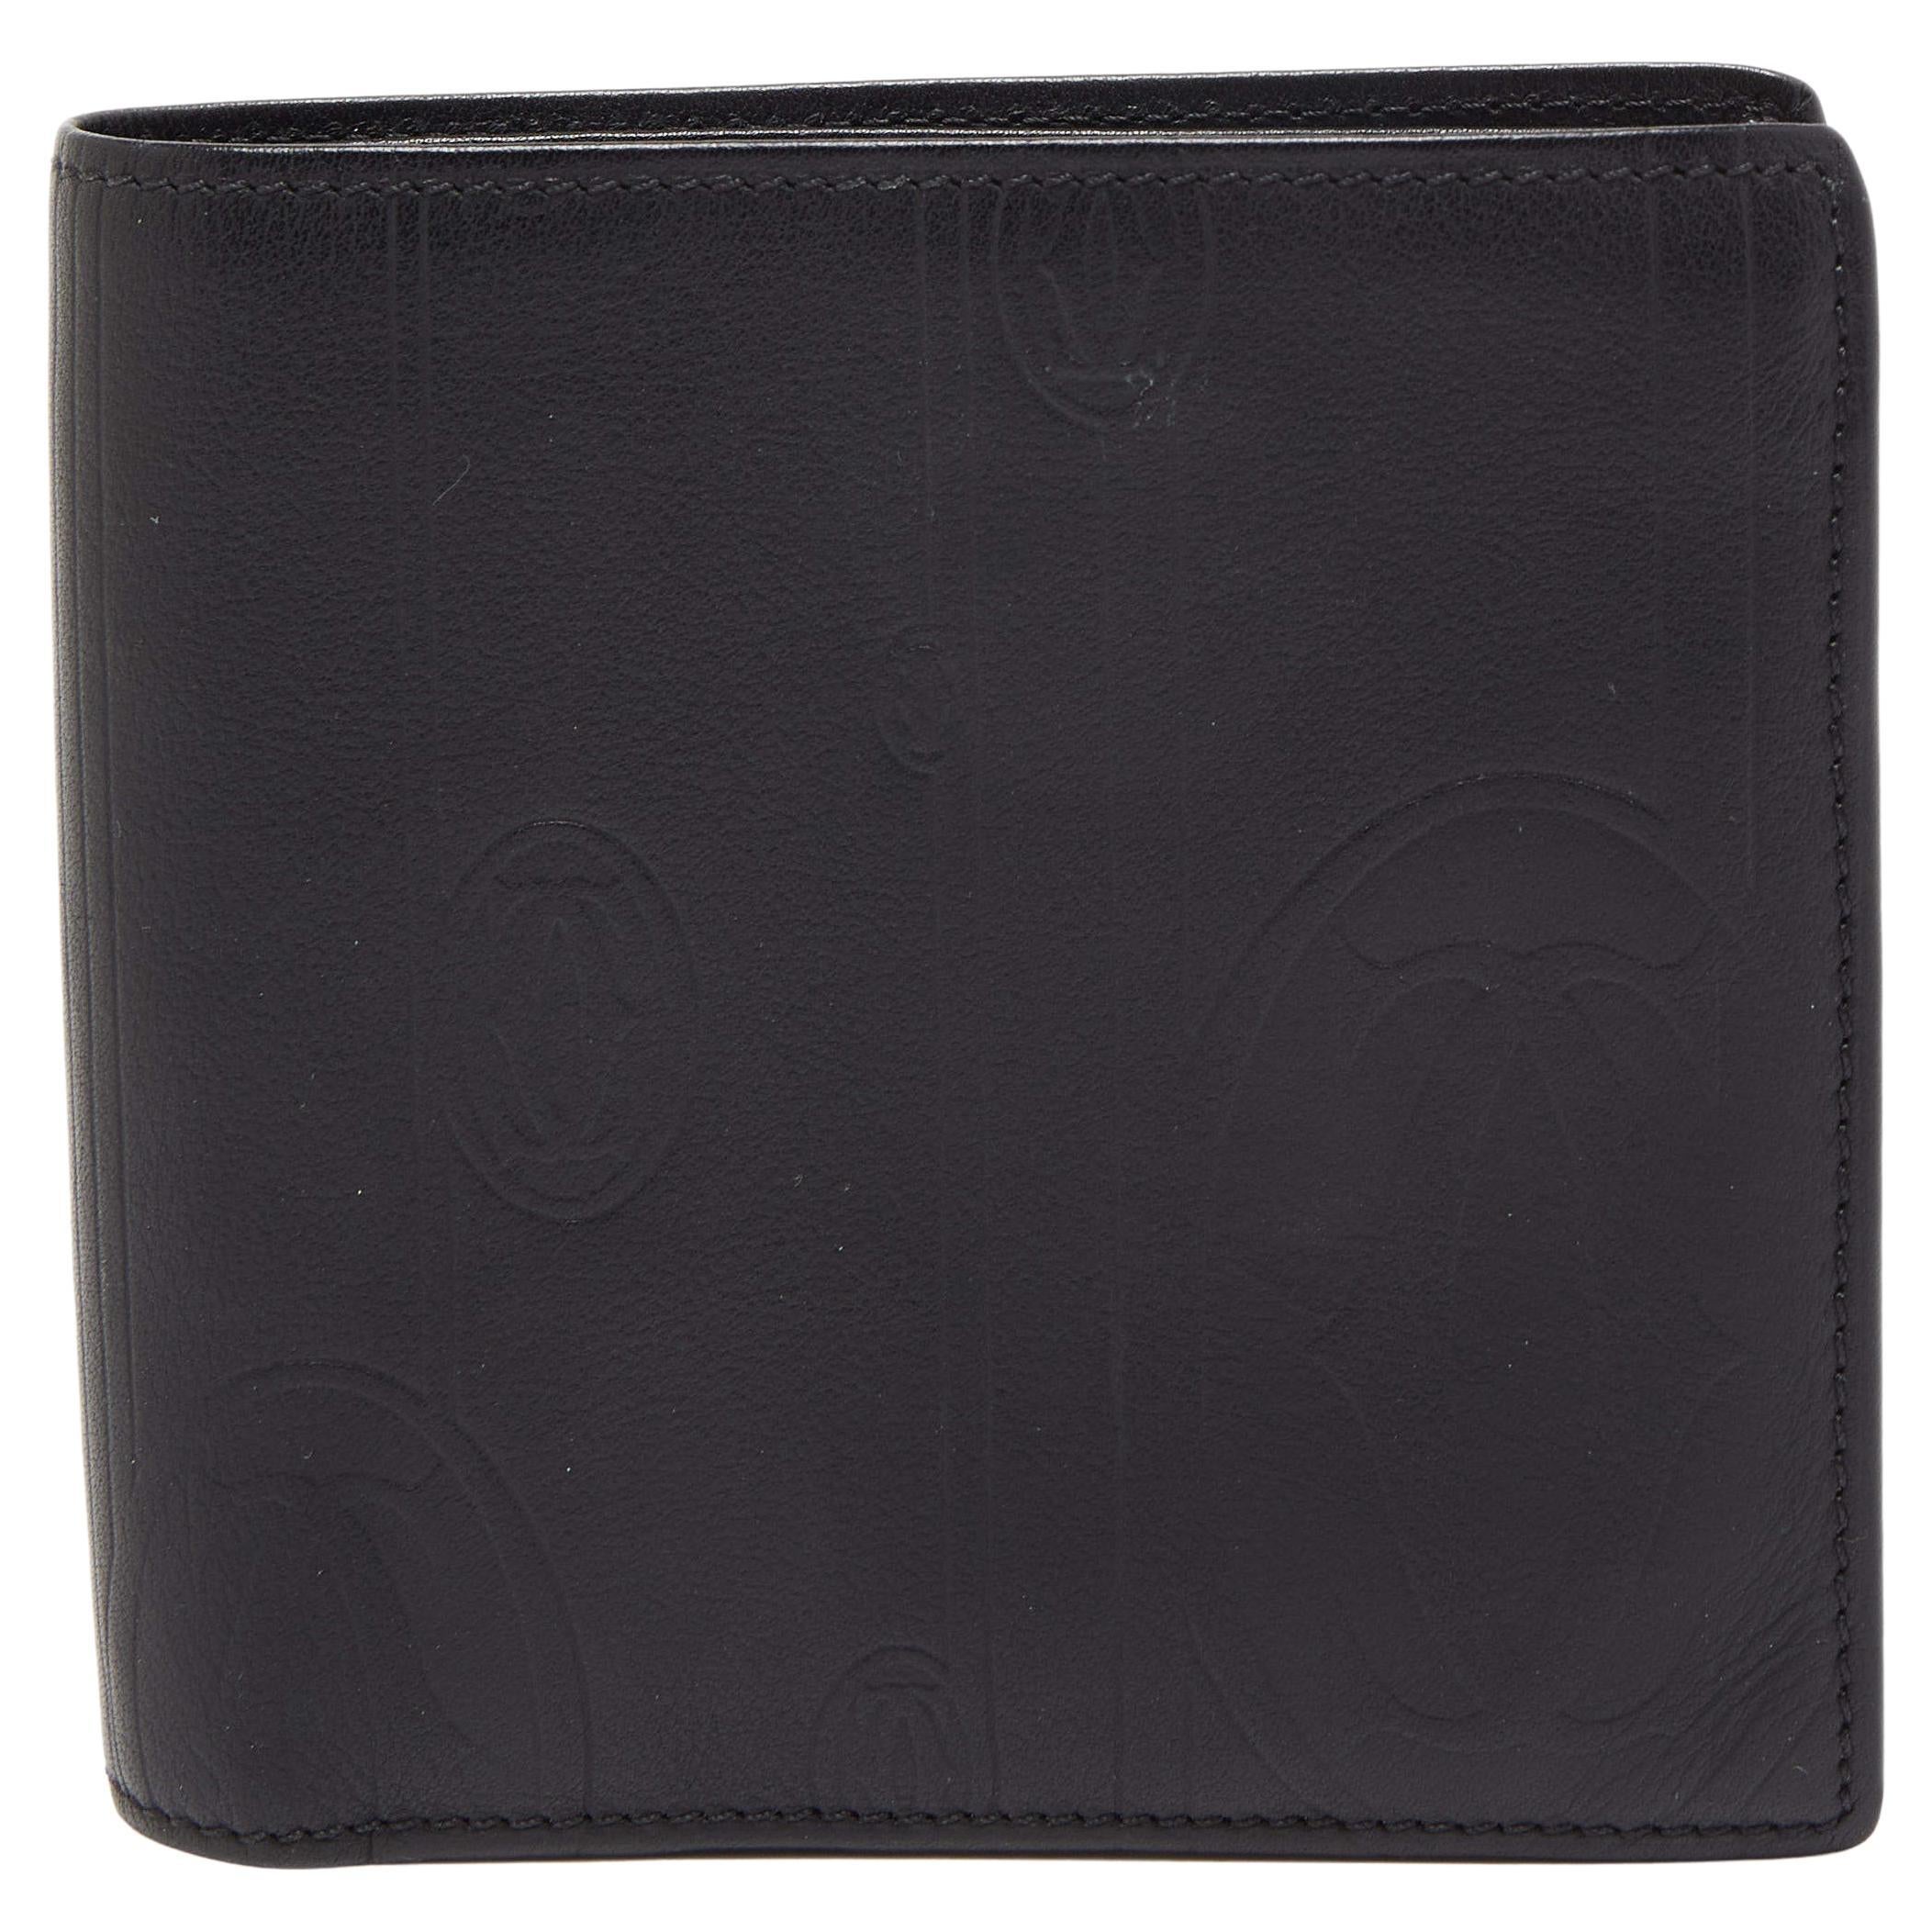 Cartier Black Leather Bifold Wallet For Sale